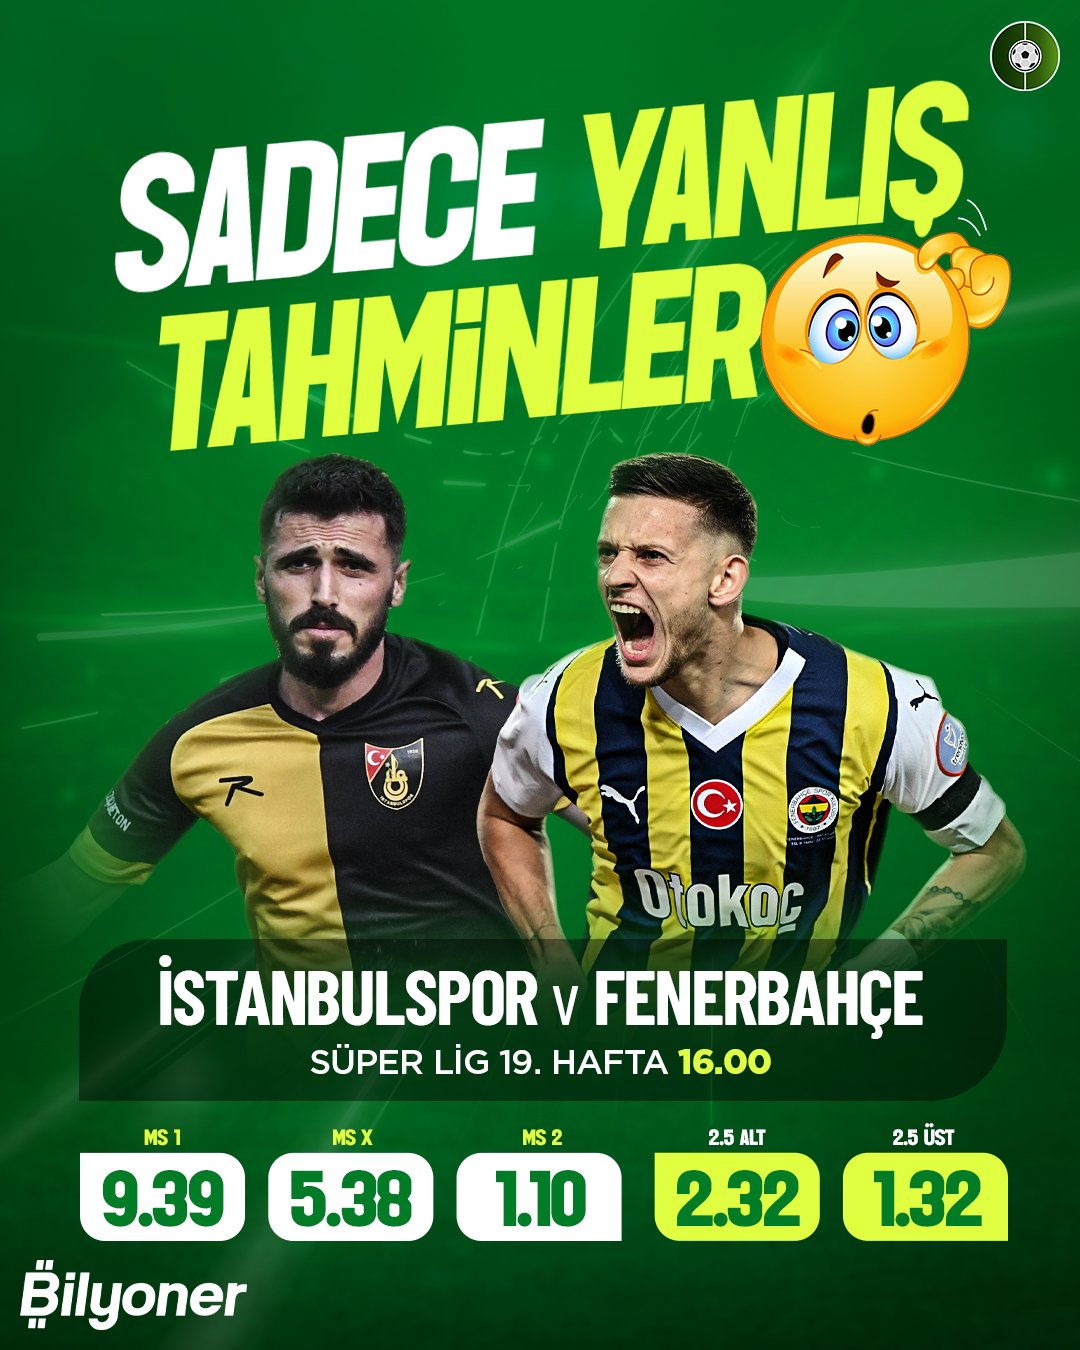 The Fenerbahçe x Galatasaray Rivalry: A Battle for Football Supremacy